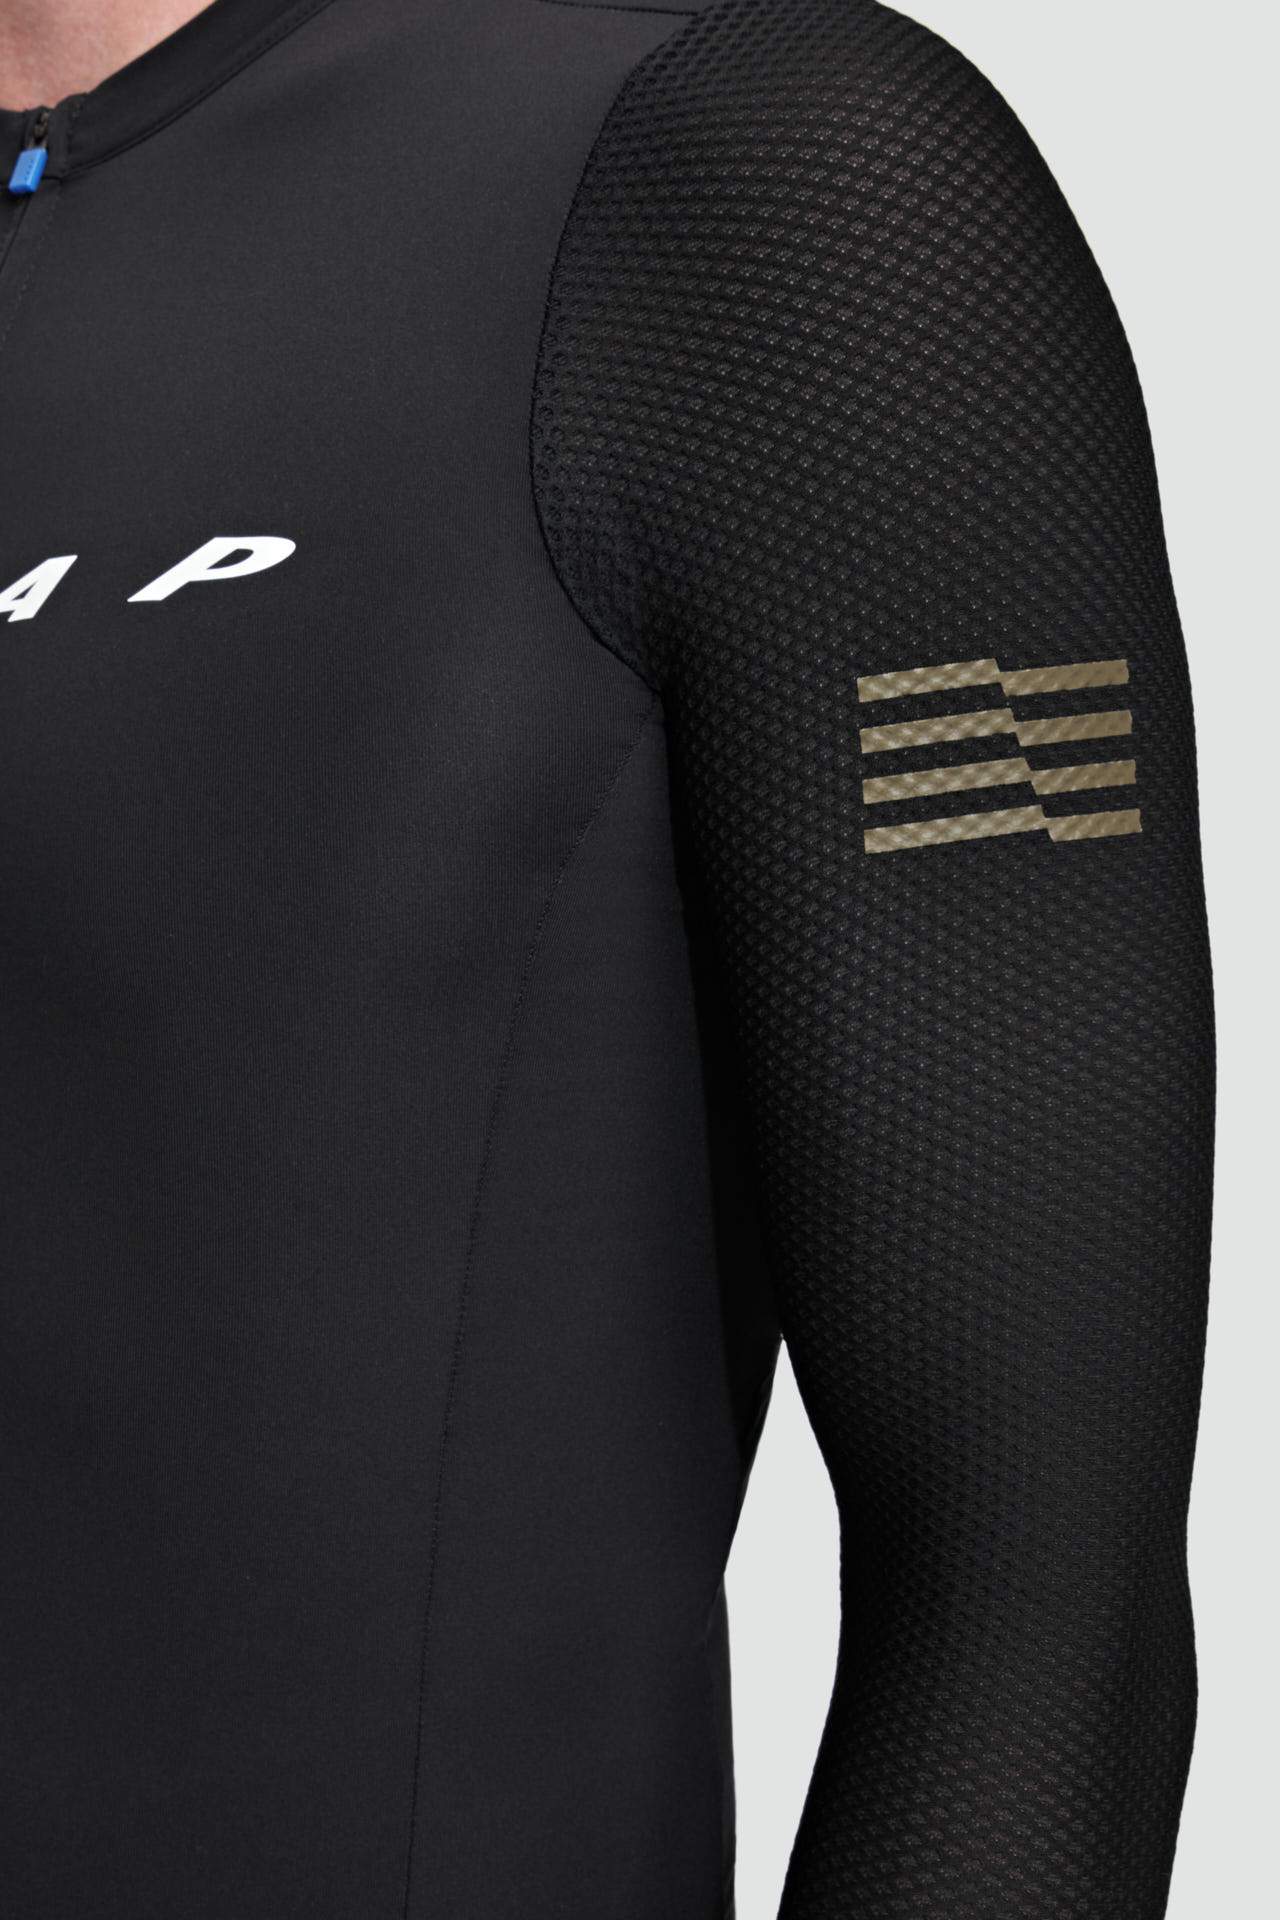 Jersey Manches Longues MAAP Evade Pro Base LS